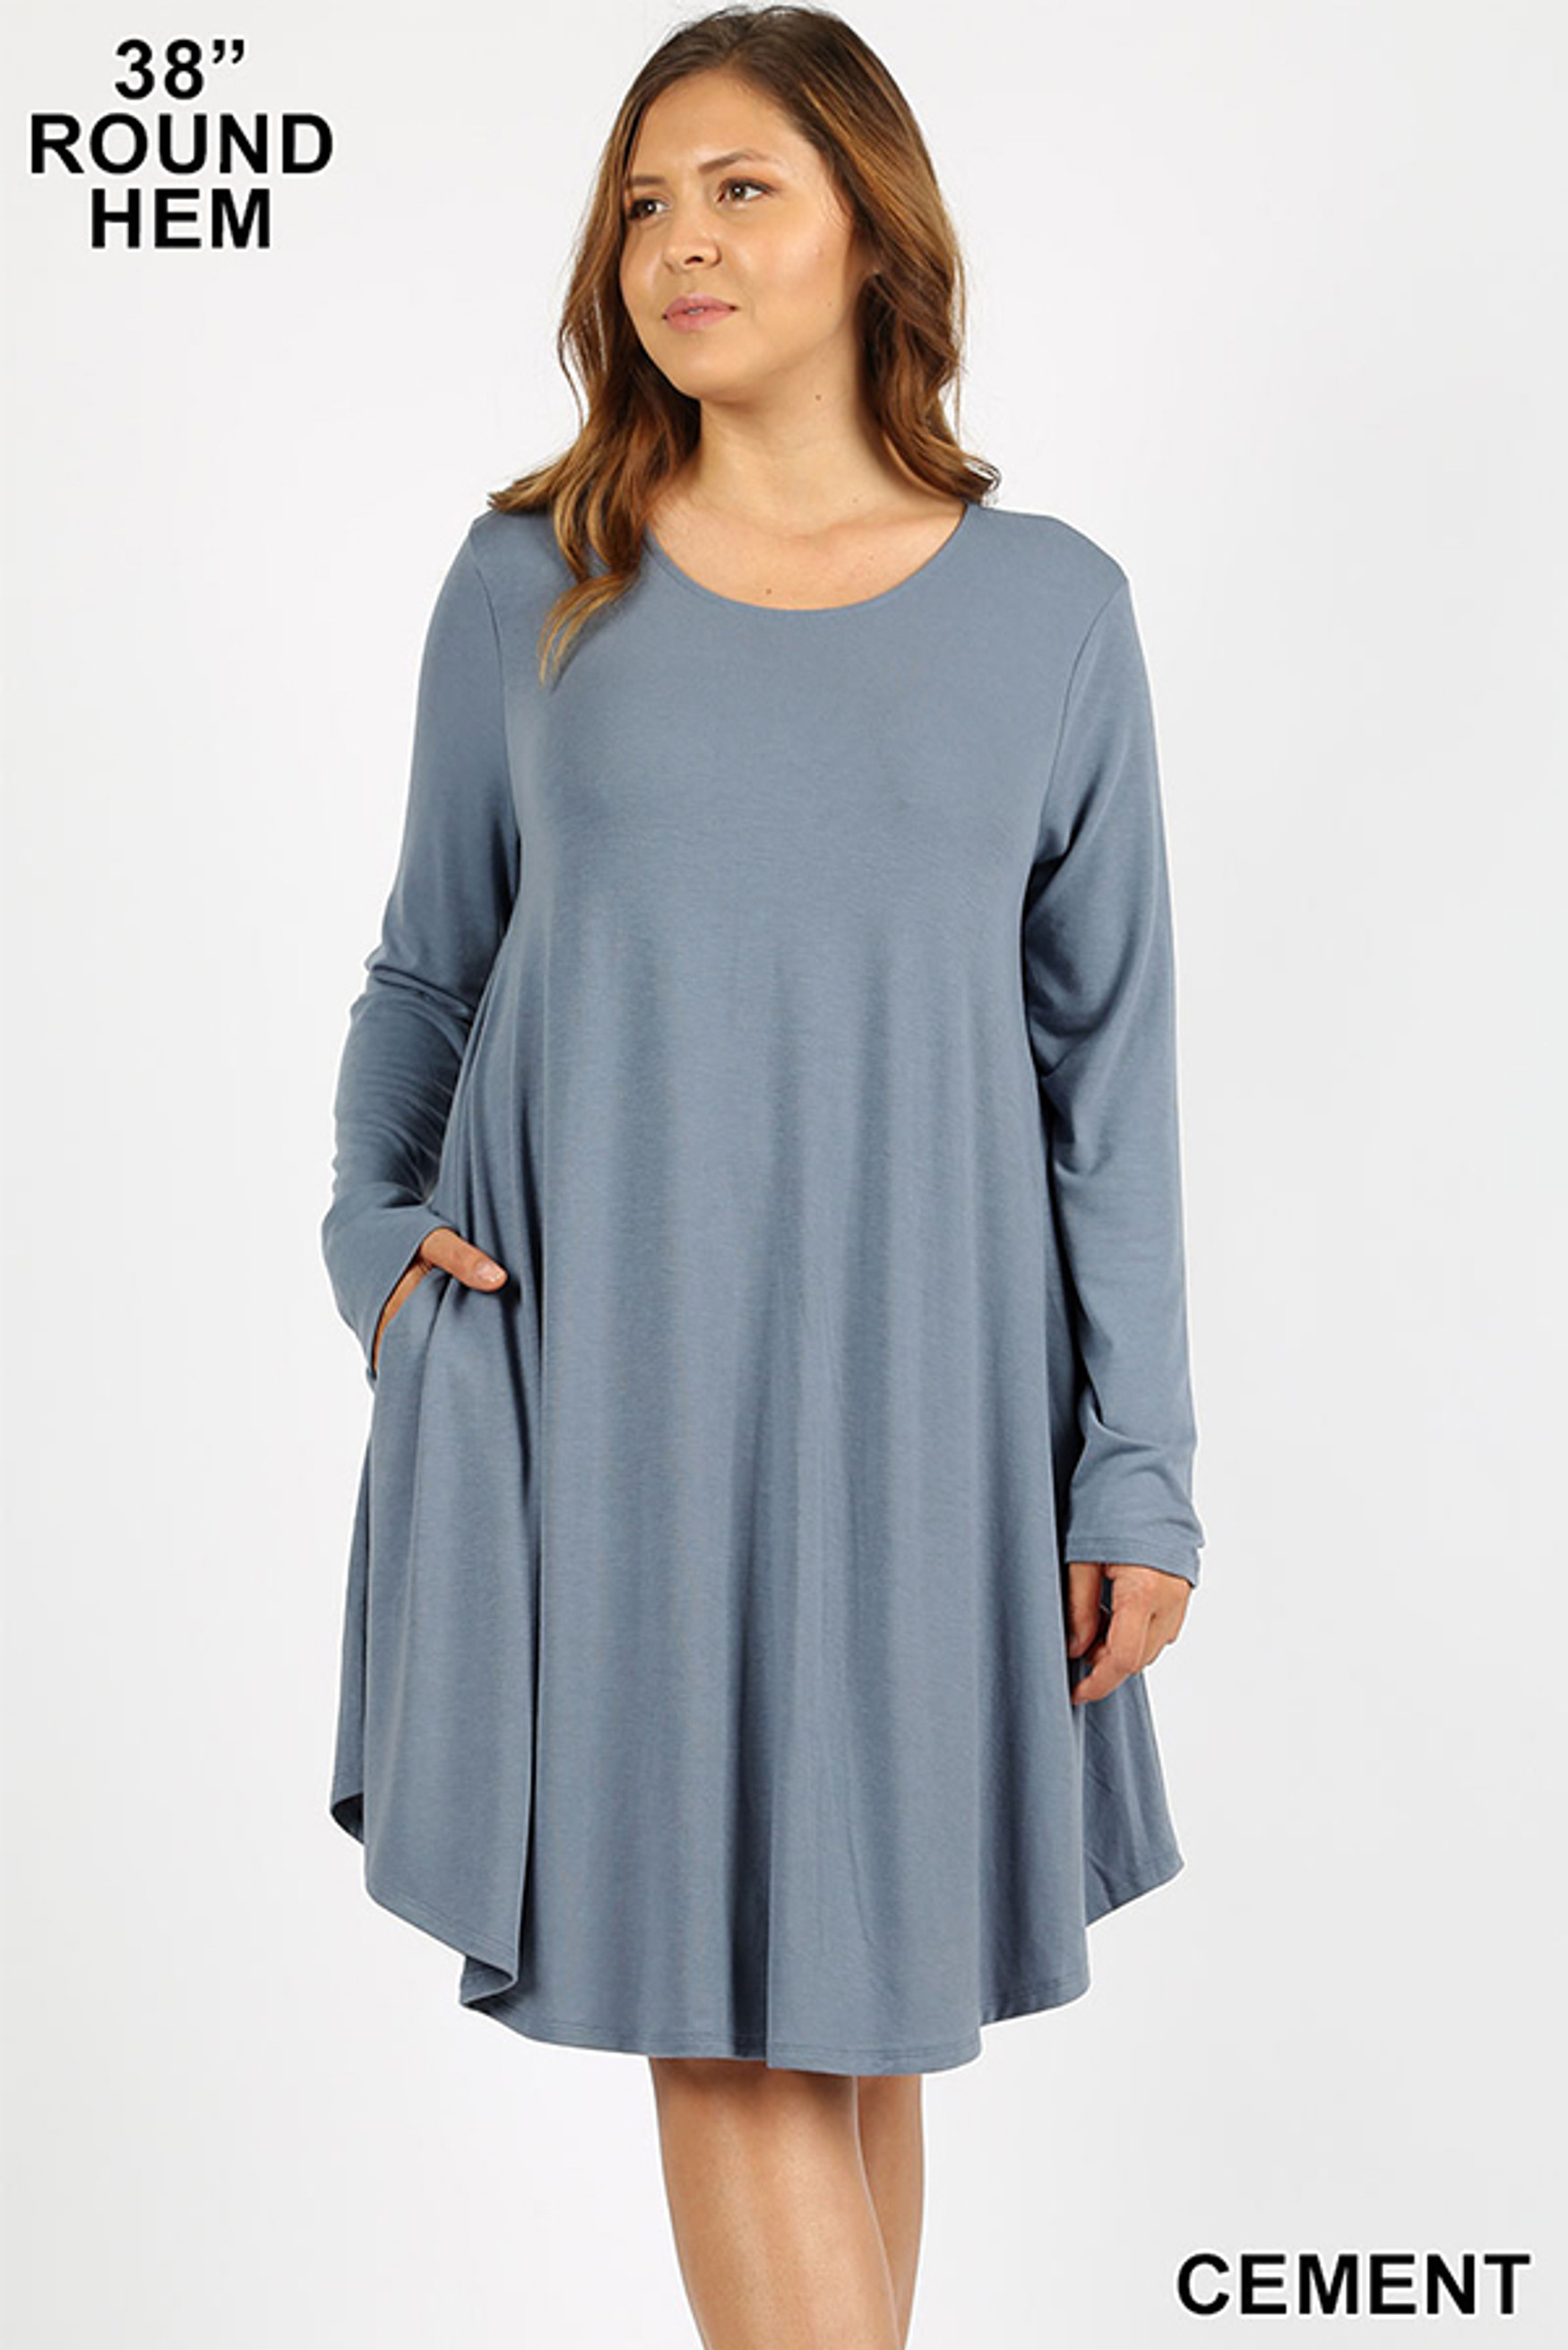 Premium Long Sleeve A-Line Round Hem Plus Size Rayon Tunic with Pockets